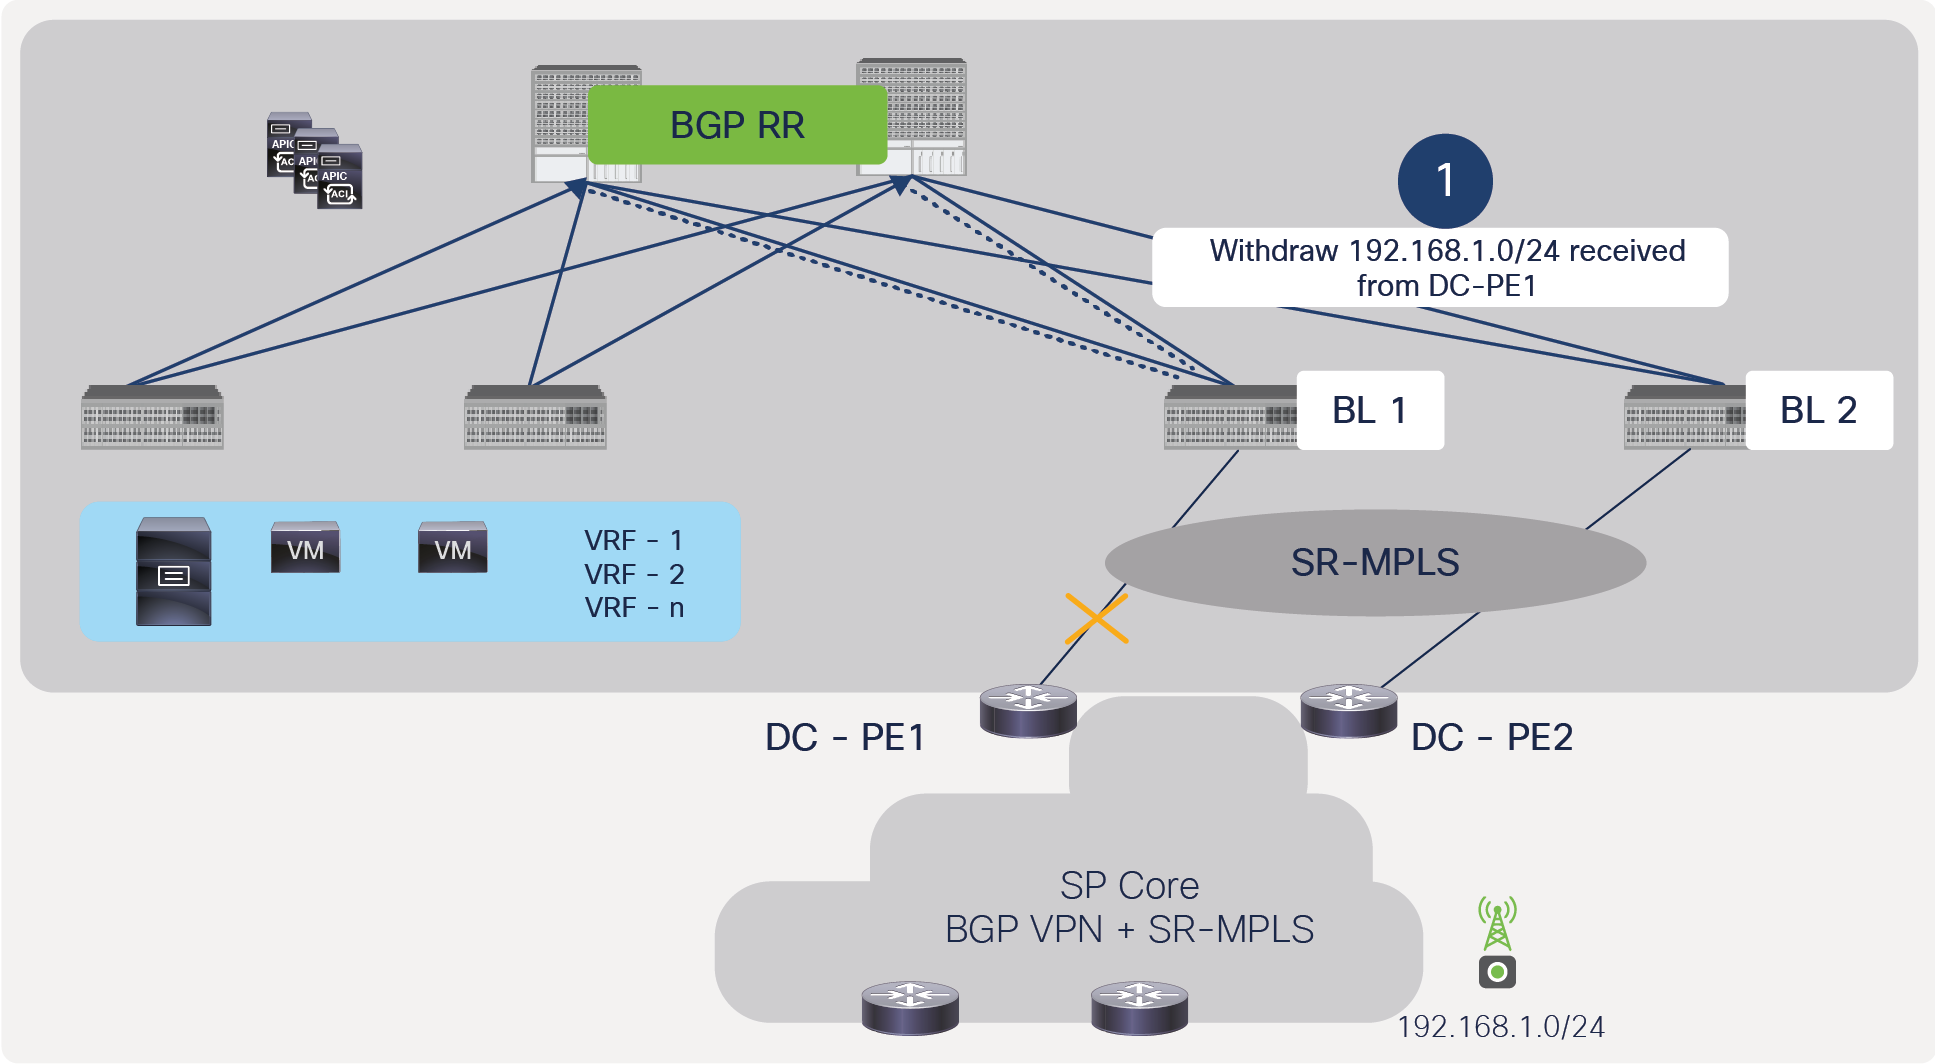 BGP withdraw message from ACI border to spine due to failure of link between ACI border leaf and DC-PE, without full redundancy